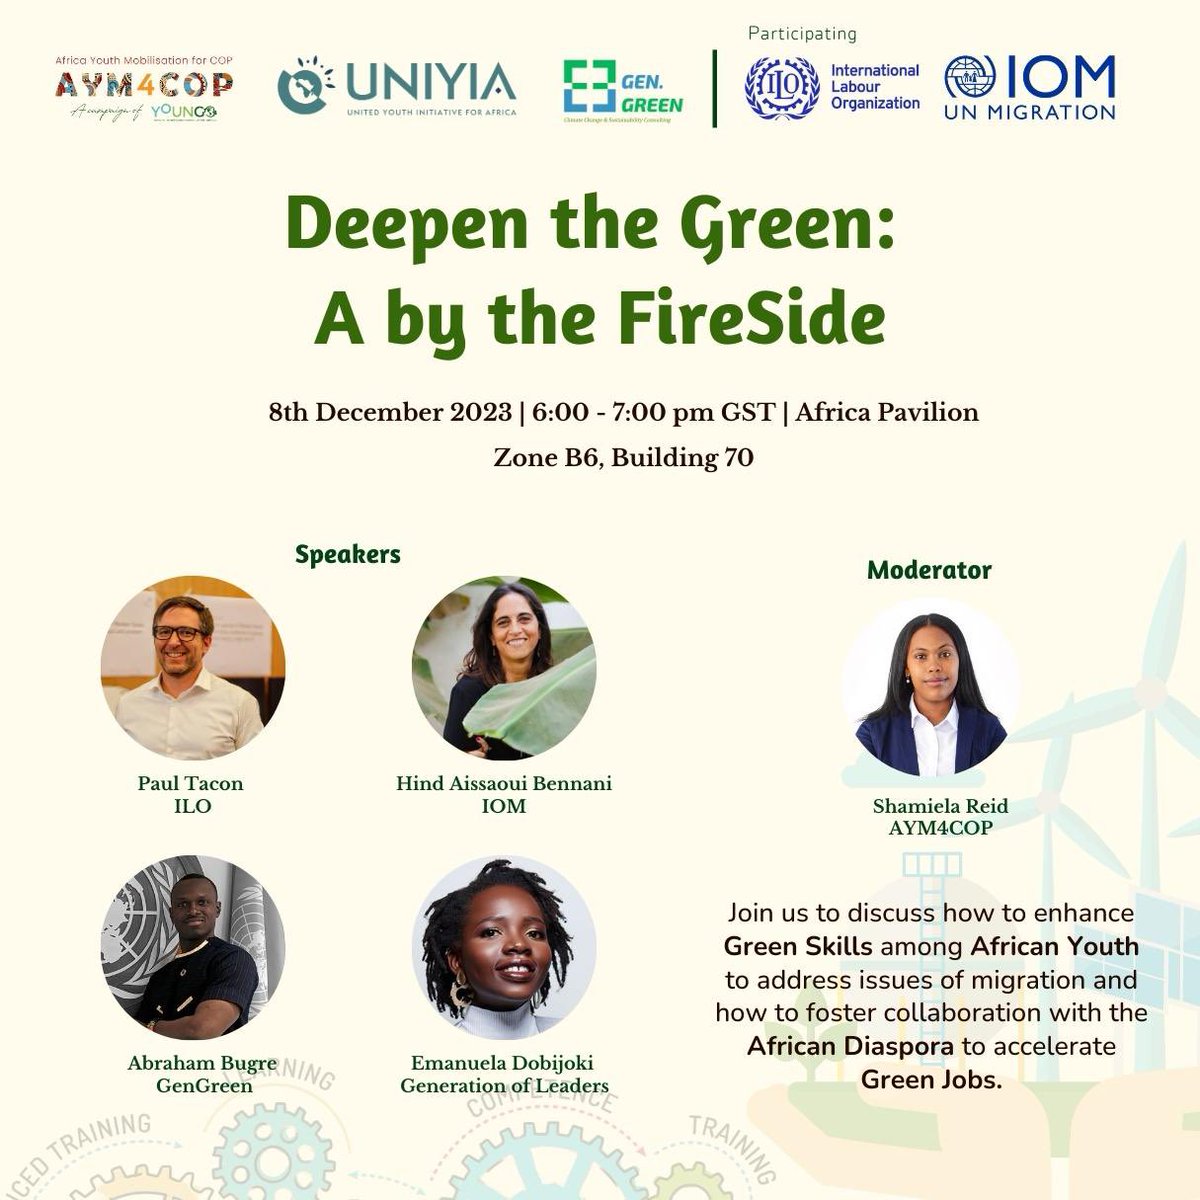 #COP28 | Join us to discuss how to enhance #GreenSkills among African Youth to address issues of #migration and how to foster collaboration with the African Diaspora to accelerate Green Jobs #COP28_UAE #UNIYIA